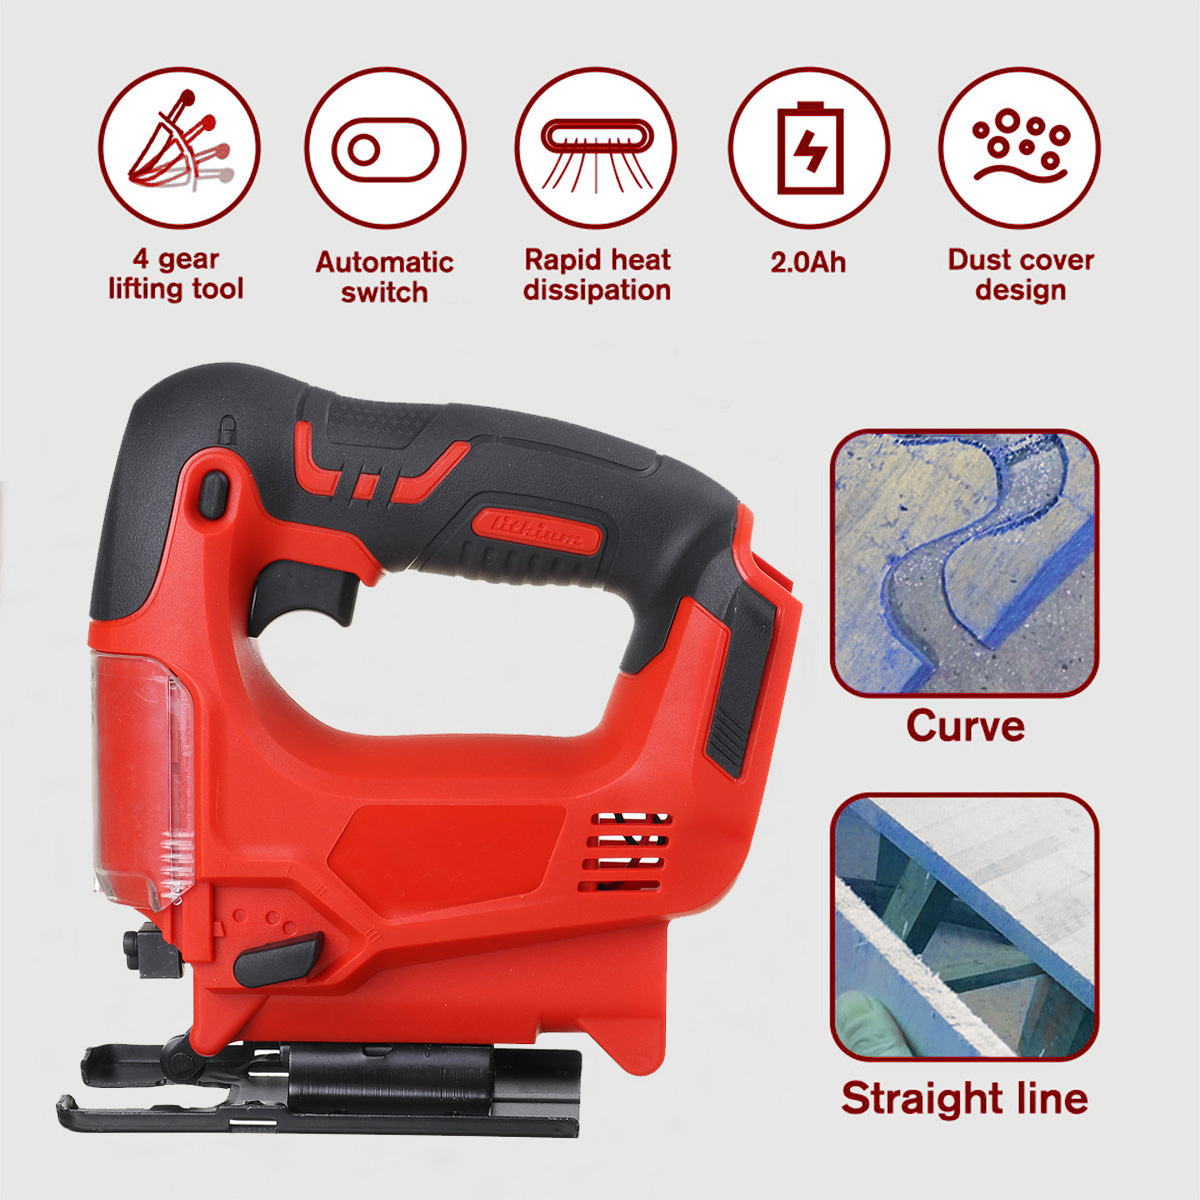 Drillpro-2000mAh-Electric-Saws-Cordless-Jig-Saw-Angle-Adjustble-65mm-Cutting-Depth-With-1-Or-2-Batte-1840189-4